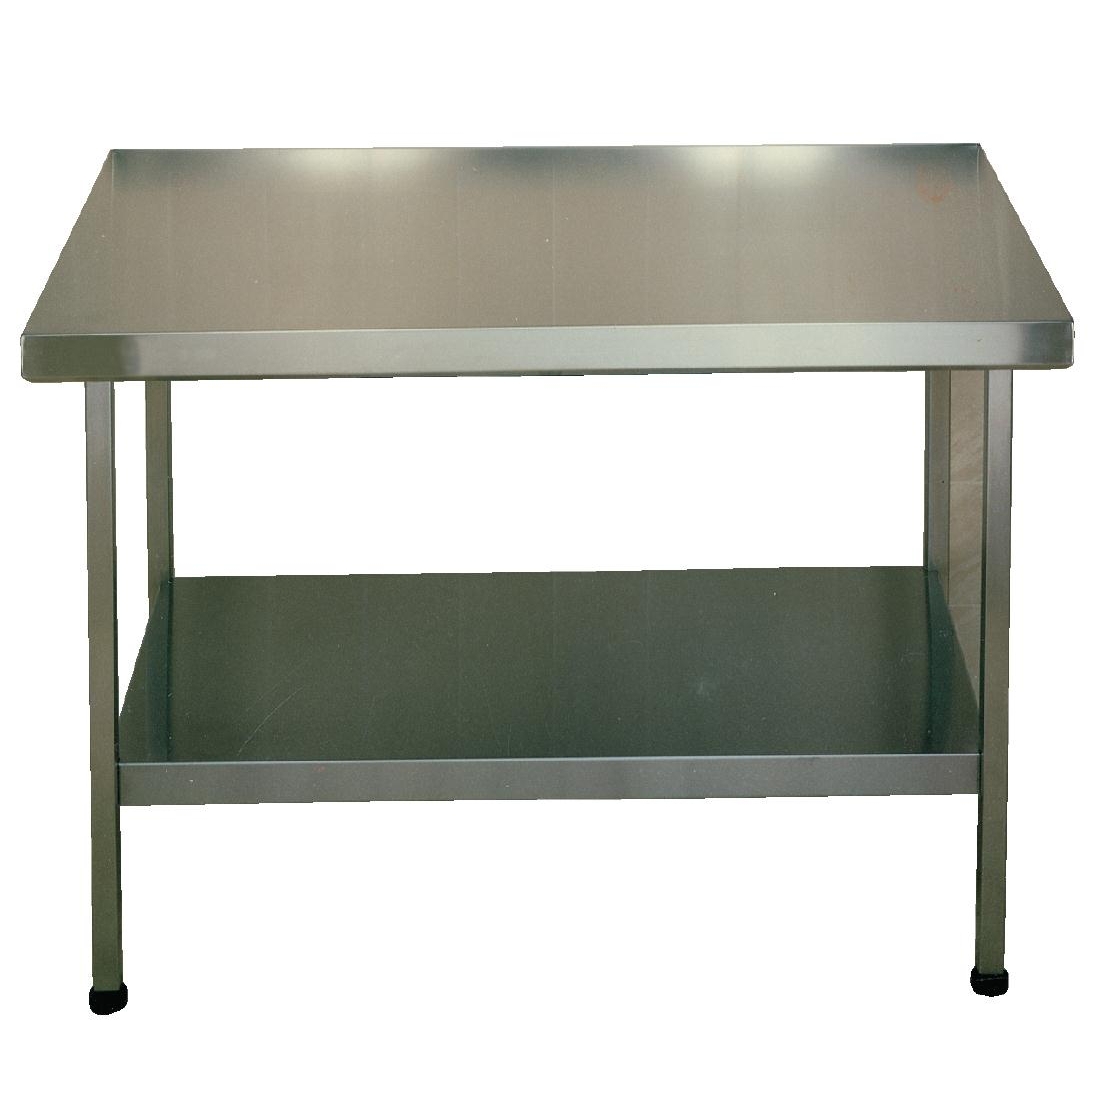 Franke Sissons Stainless Steel Centre Table 1500x650mm